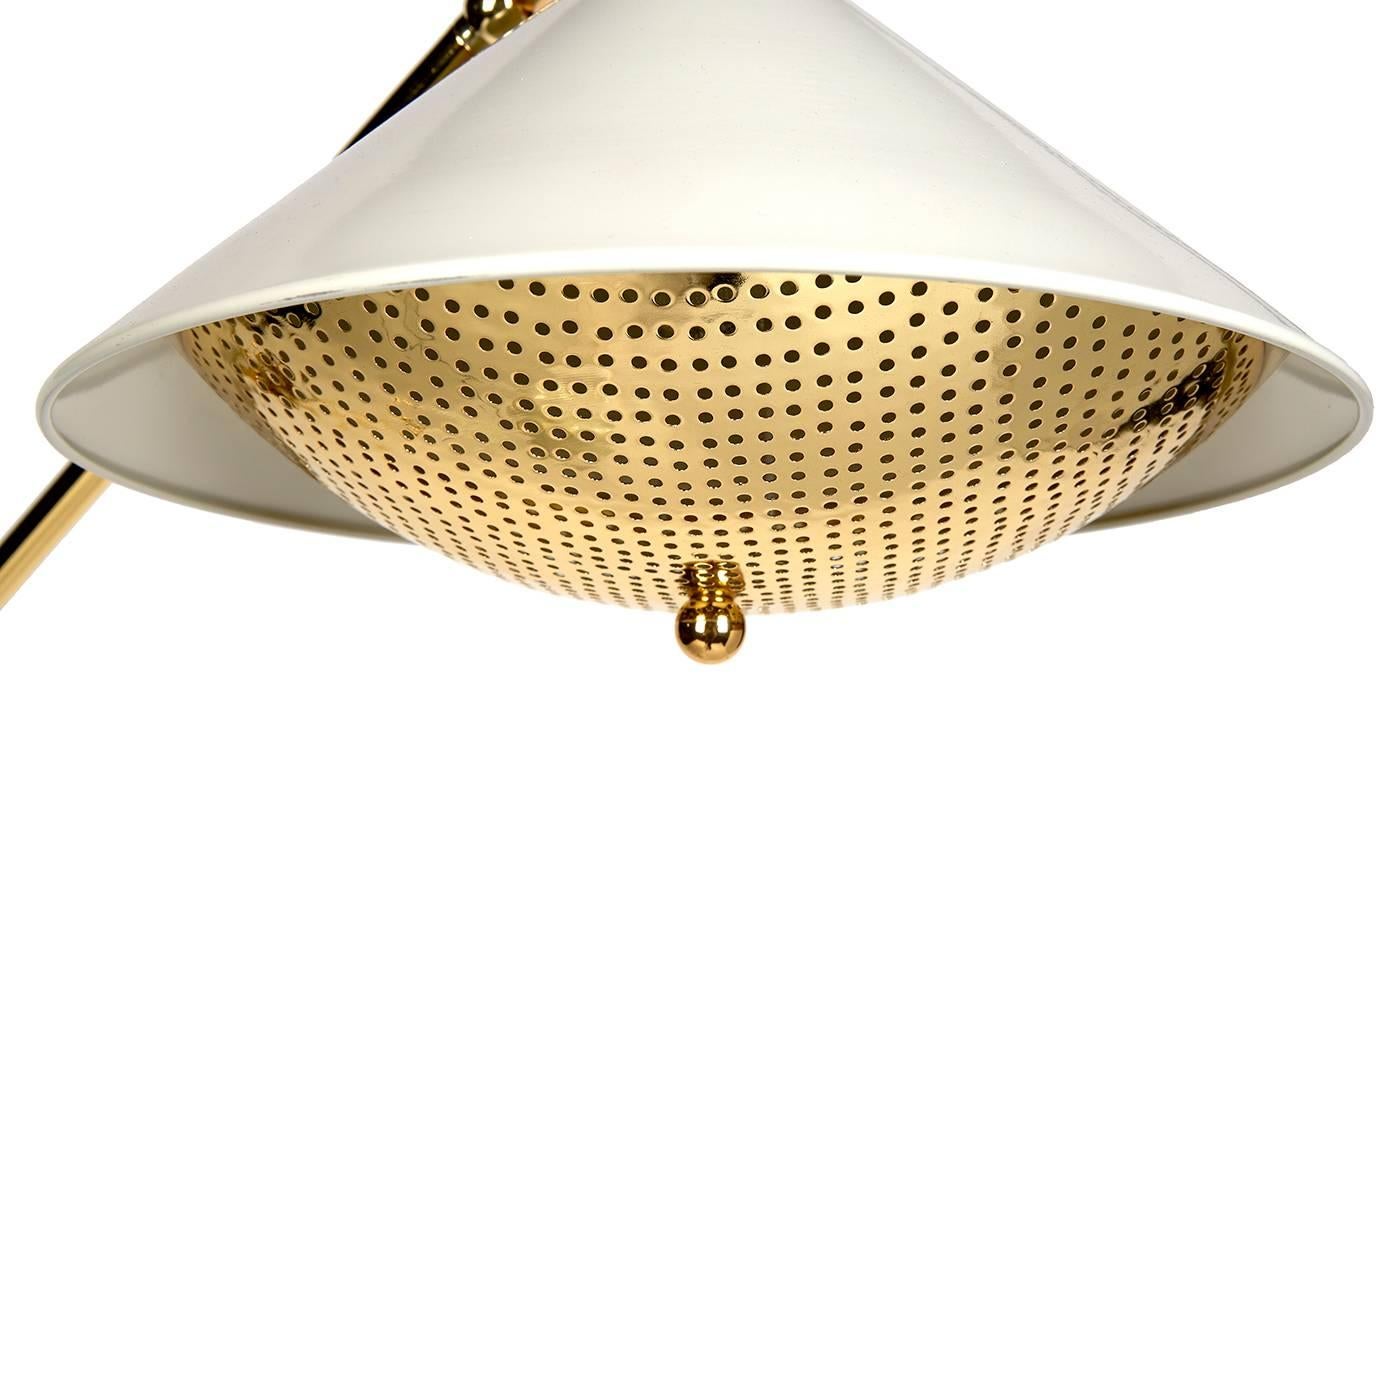 Mad Men Meets Holly Golightly. A slim, brass stem with an antique white lacquered cone base, matching shade, and signature arrow sabot. Complete with a perforated brass diffuser, our Maxime task floor lamp casts a soft golden glow. Pair with your